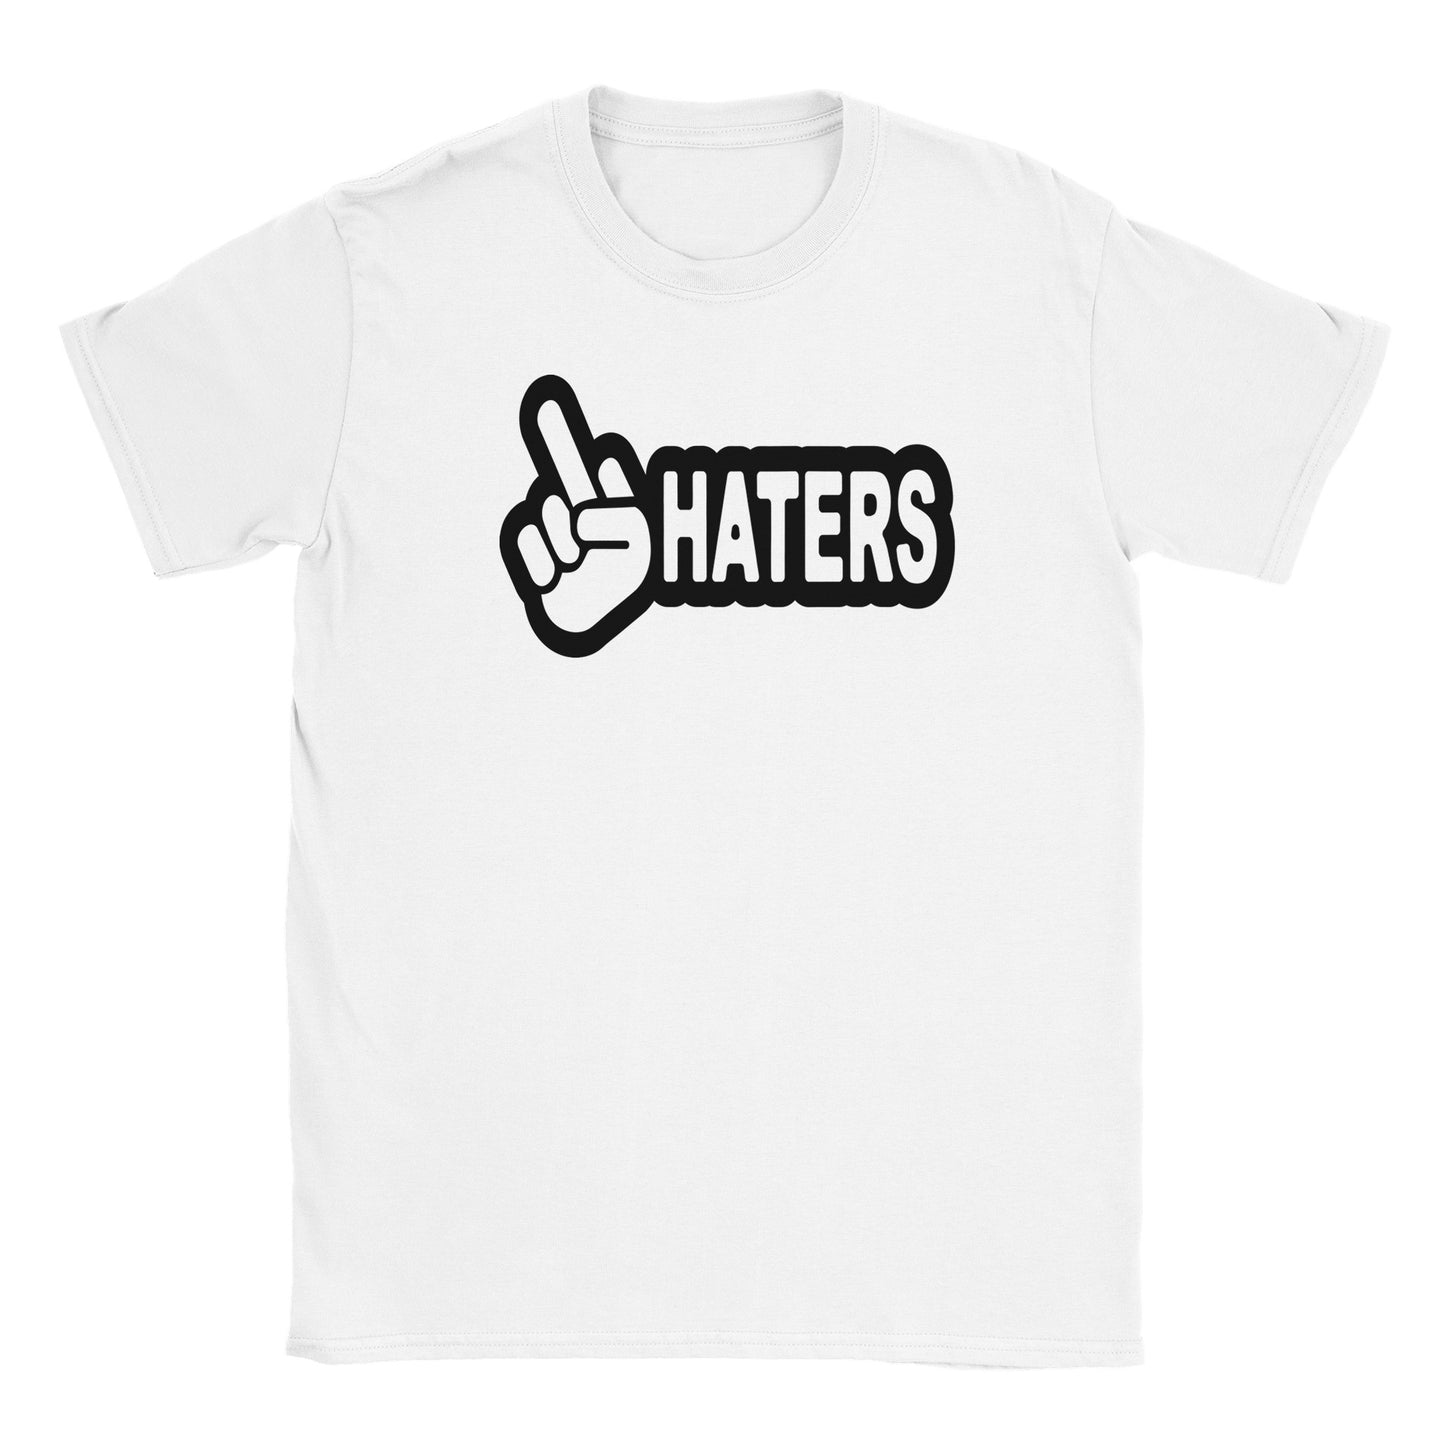 F Haters T-shirt - Mister Snarky's